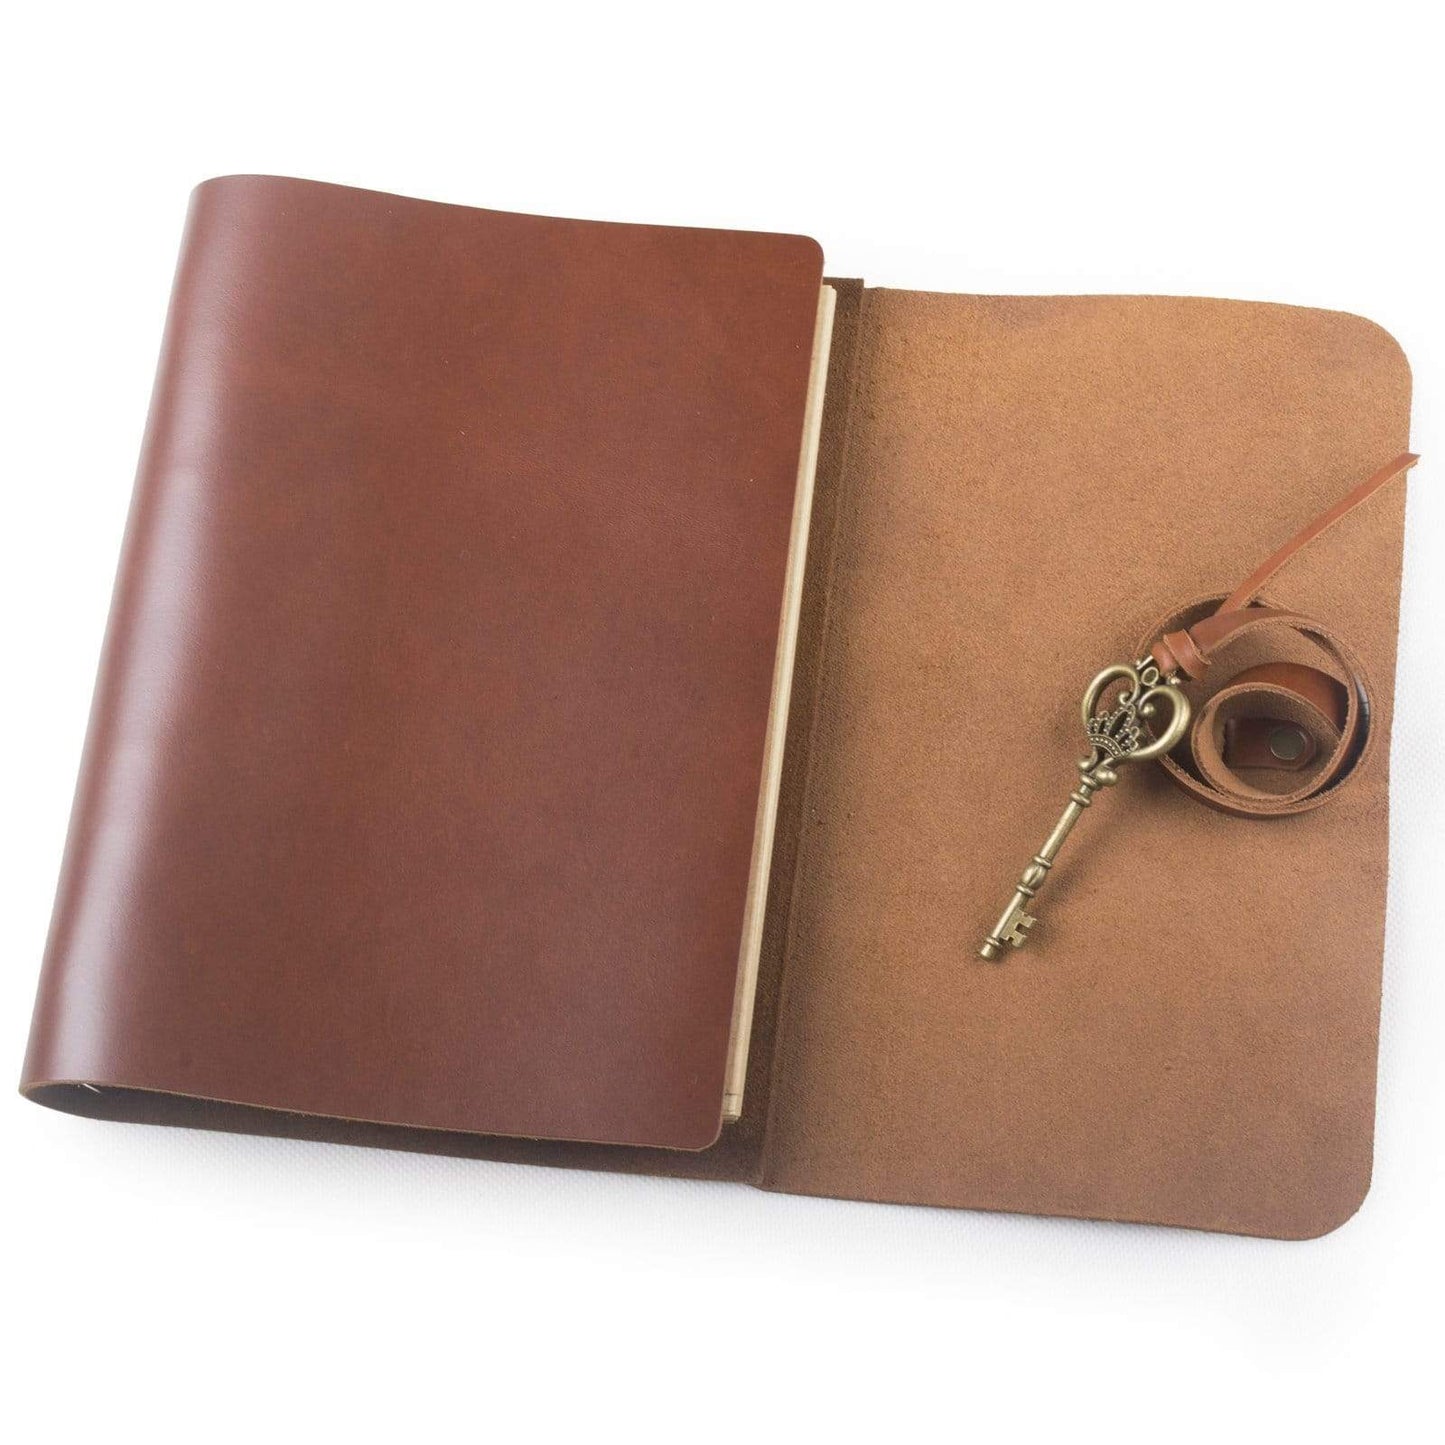 Storage retro genuine leather handmade diary travel journal notebook sketchbook with vintage key style buckle refillable with loose binder craft paper red brown a5 lined craft paper